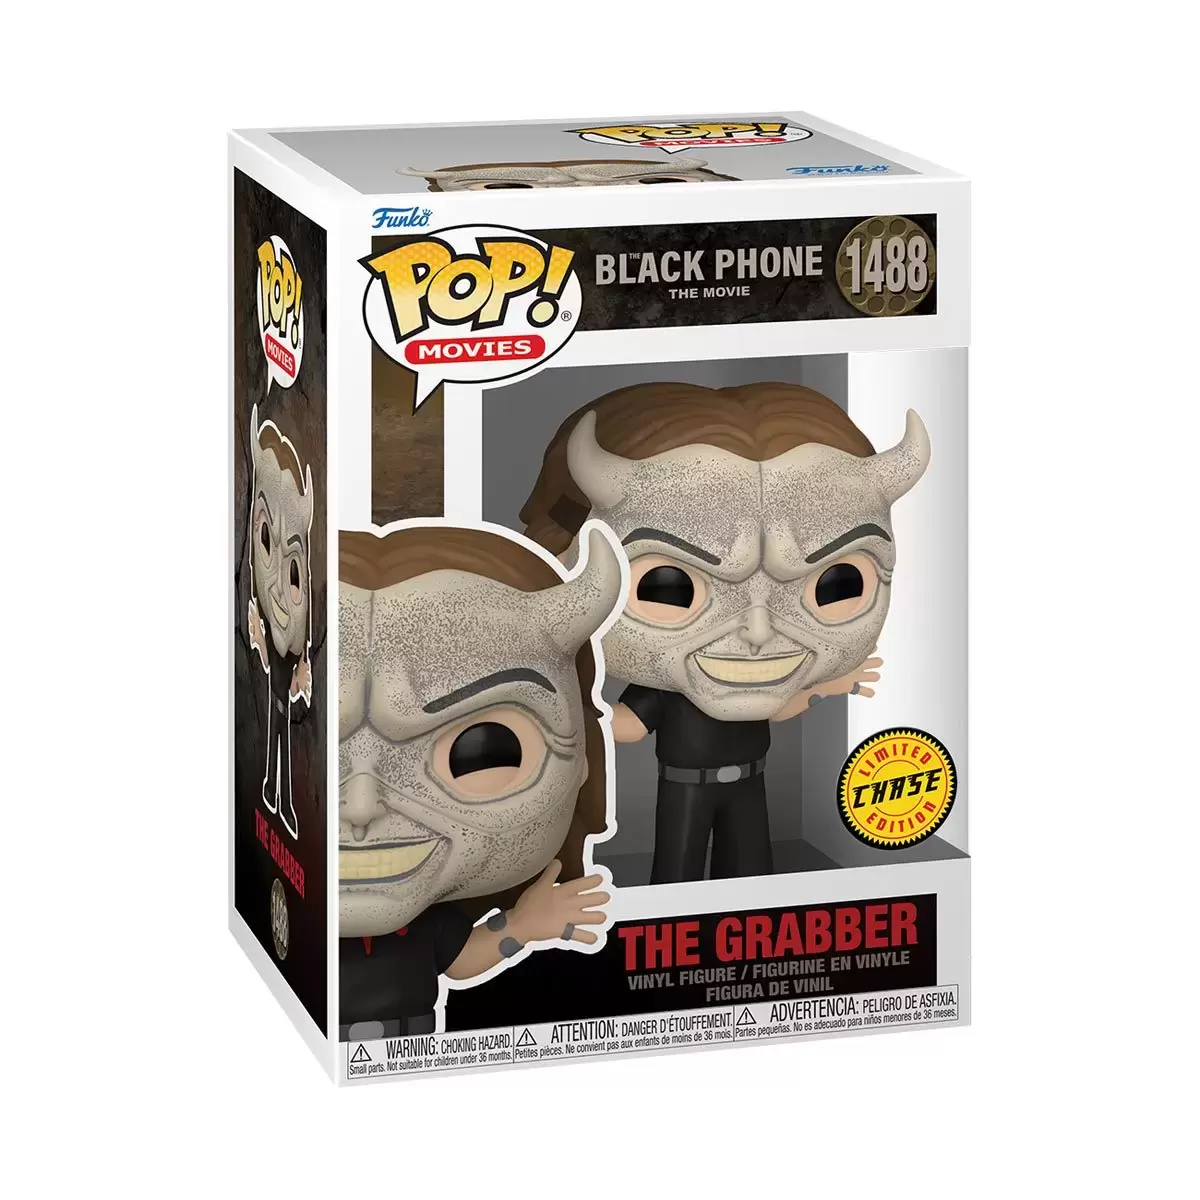 POP! Movies - The Black Phone - The Grabber Chase